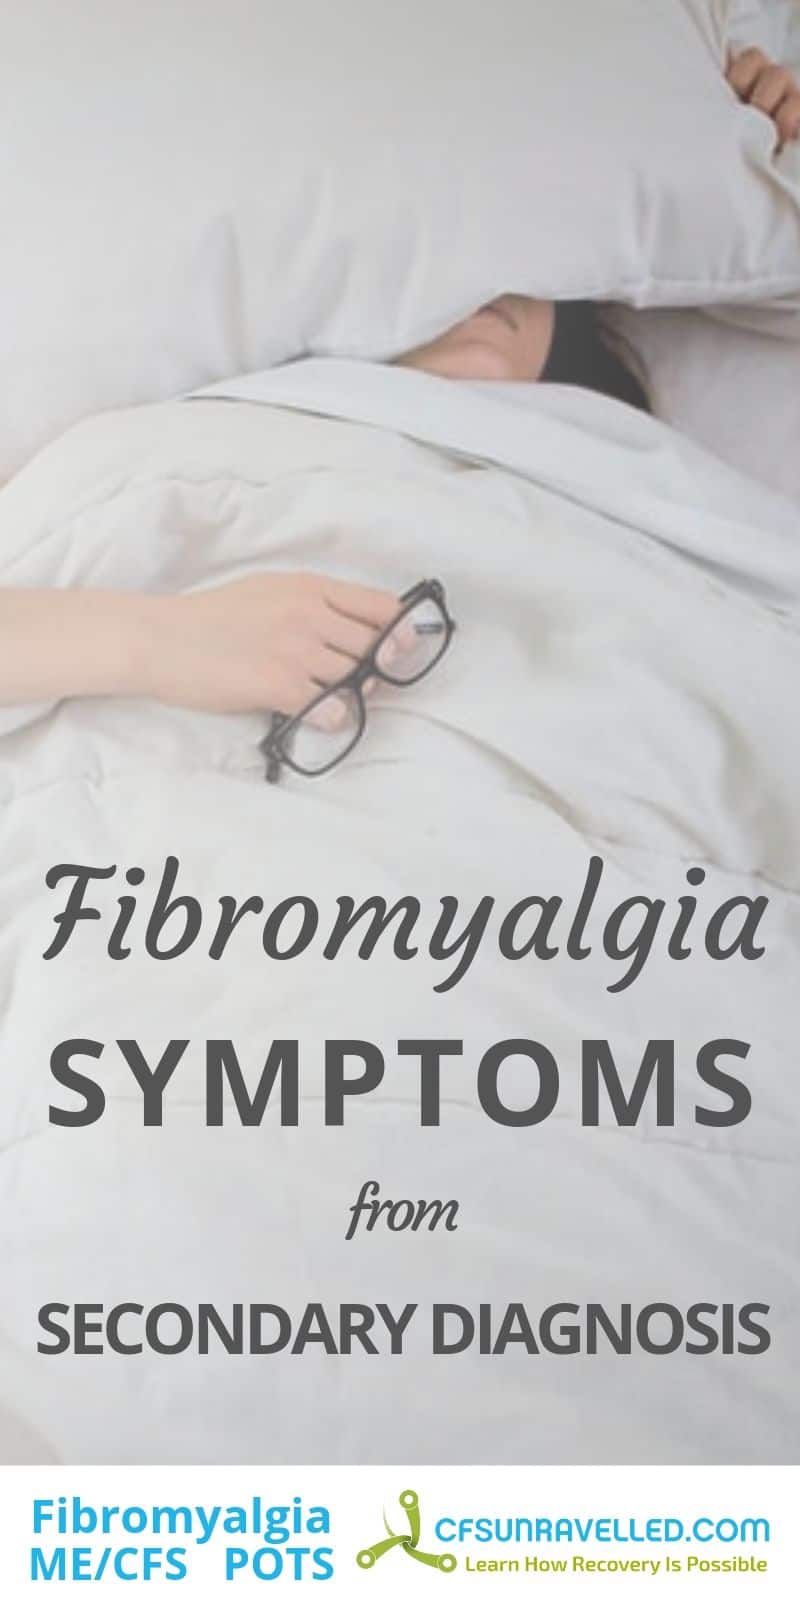 under bed cover with headline about fibromyalgia symptoms from secondary diagnosis